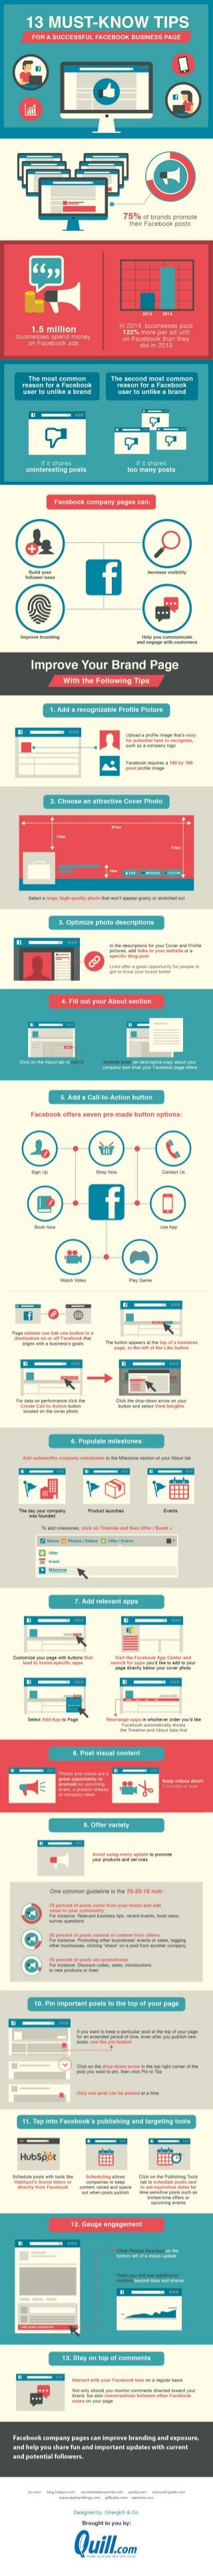 2016 04-infographic-facebook-business-page-tips-infographic